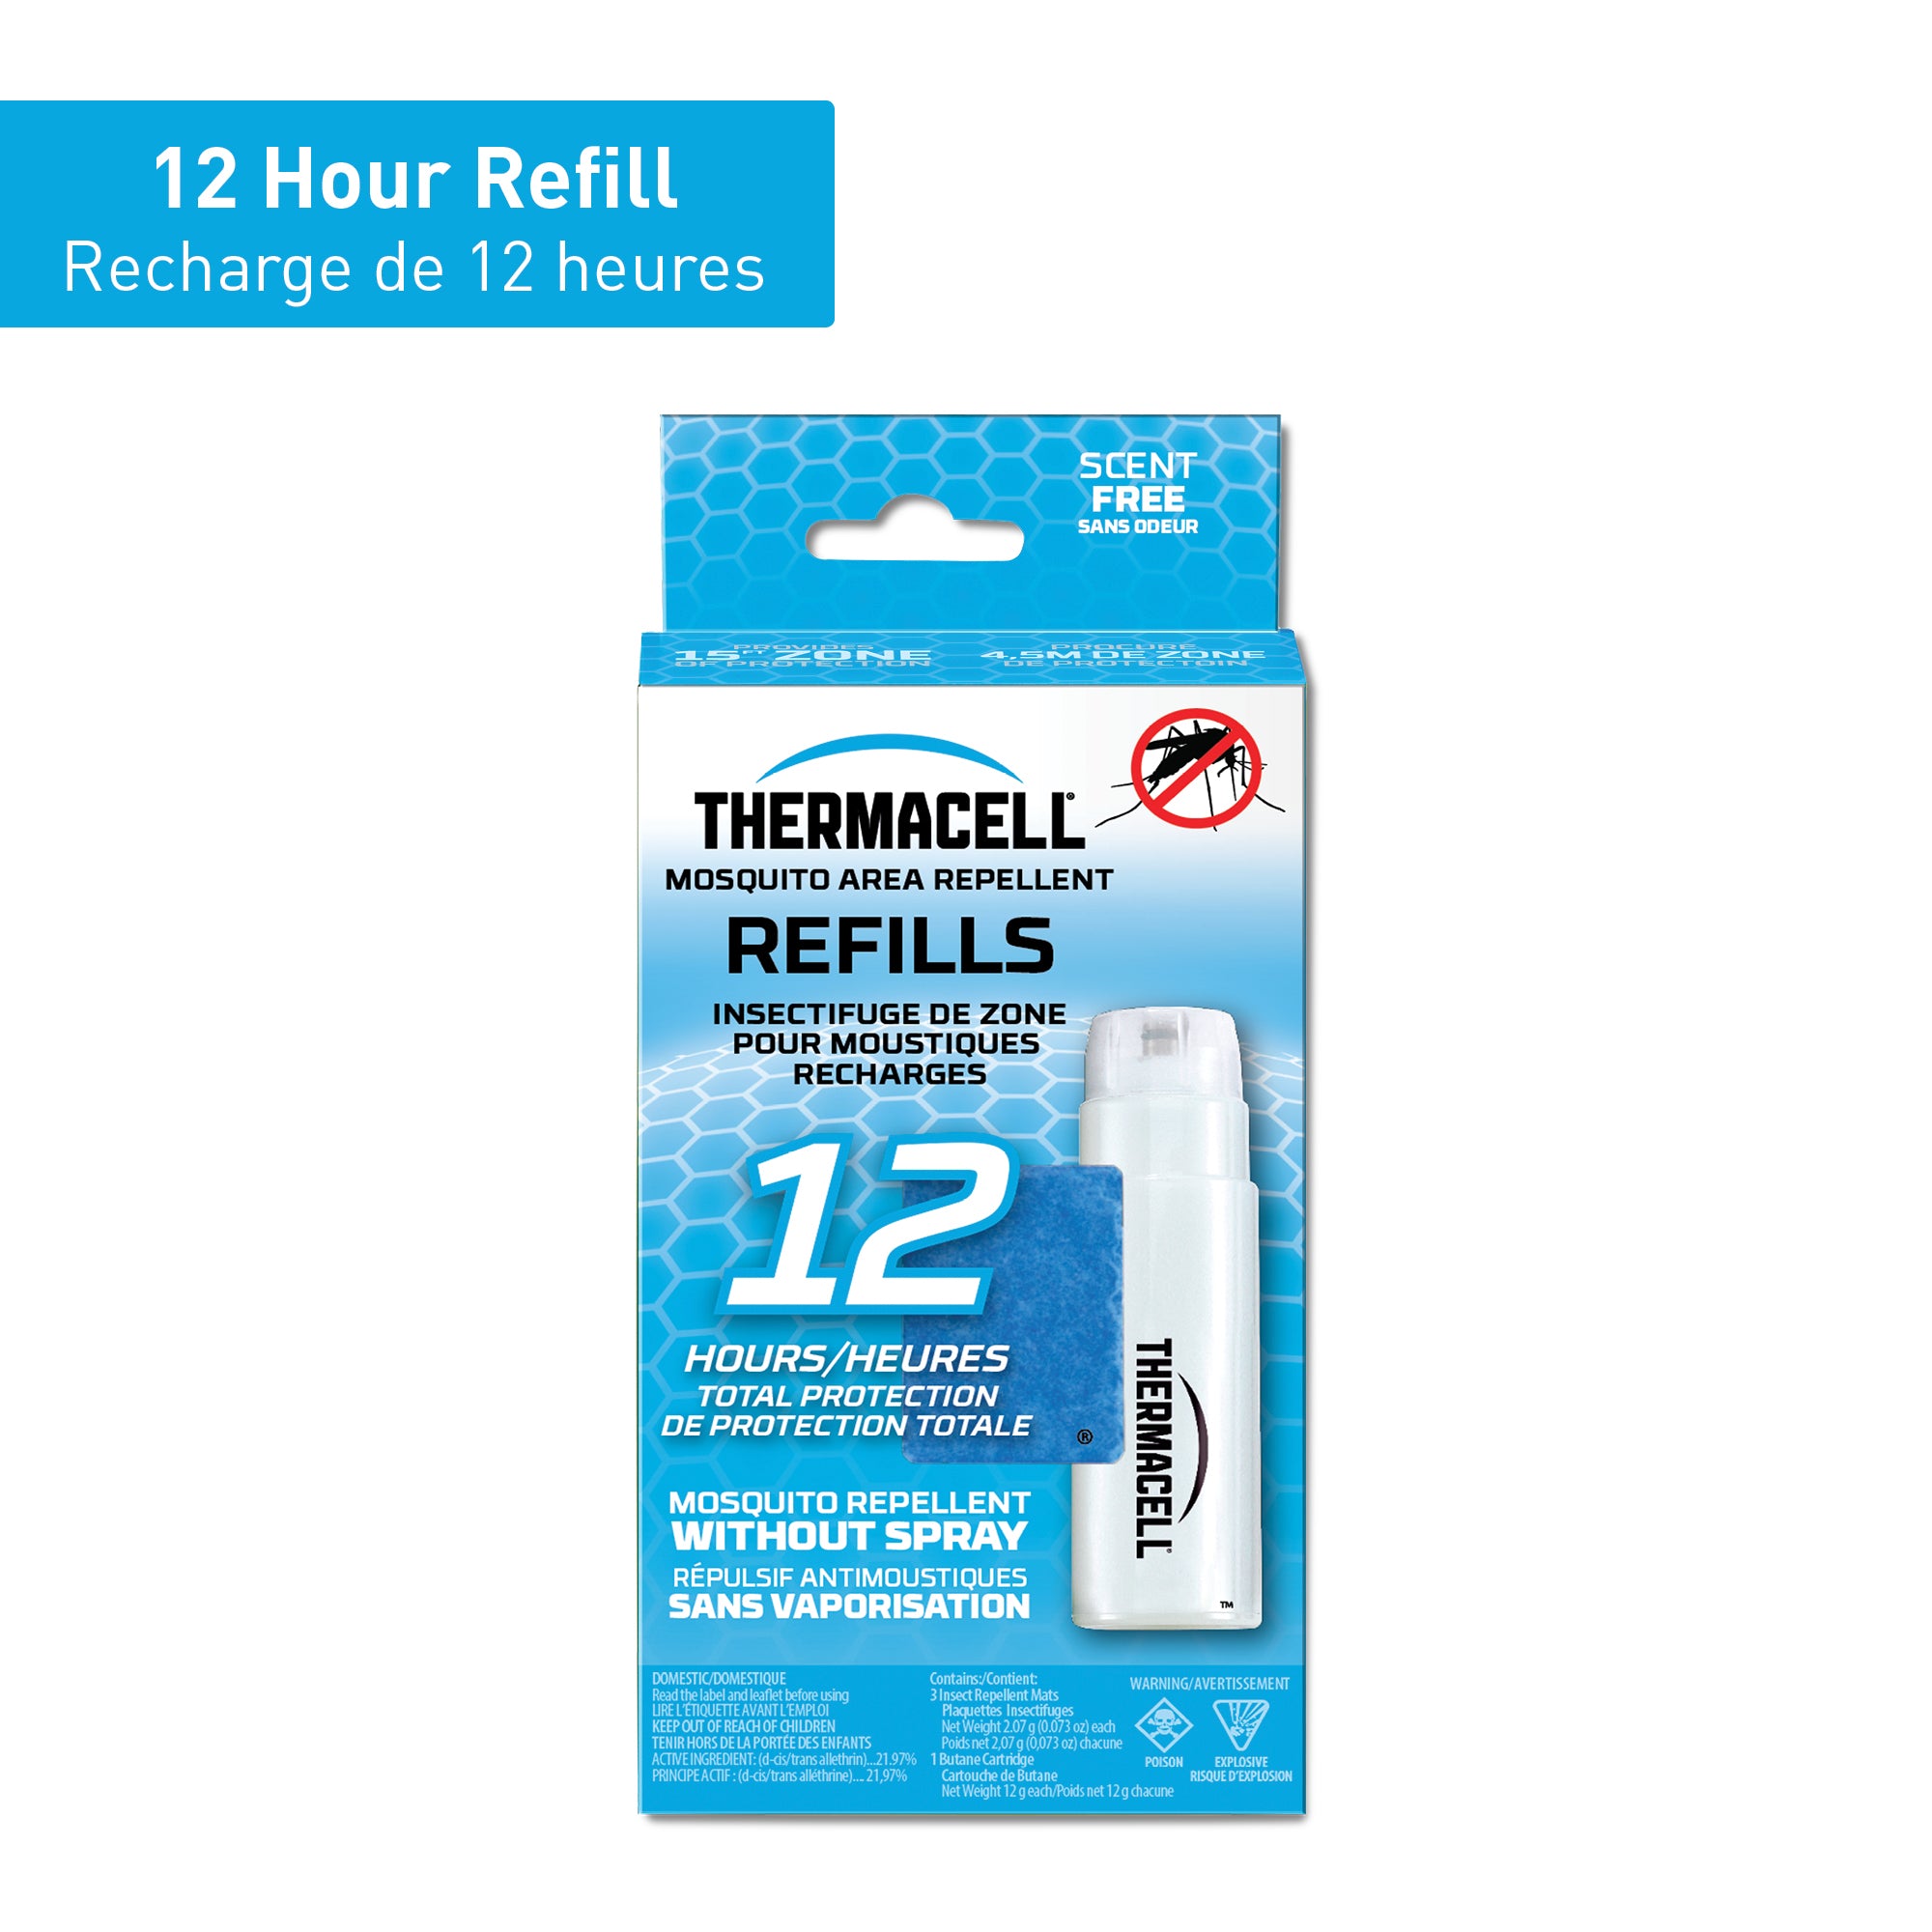 Original Thermacell mosquito repellent refills